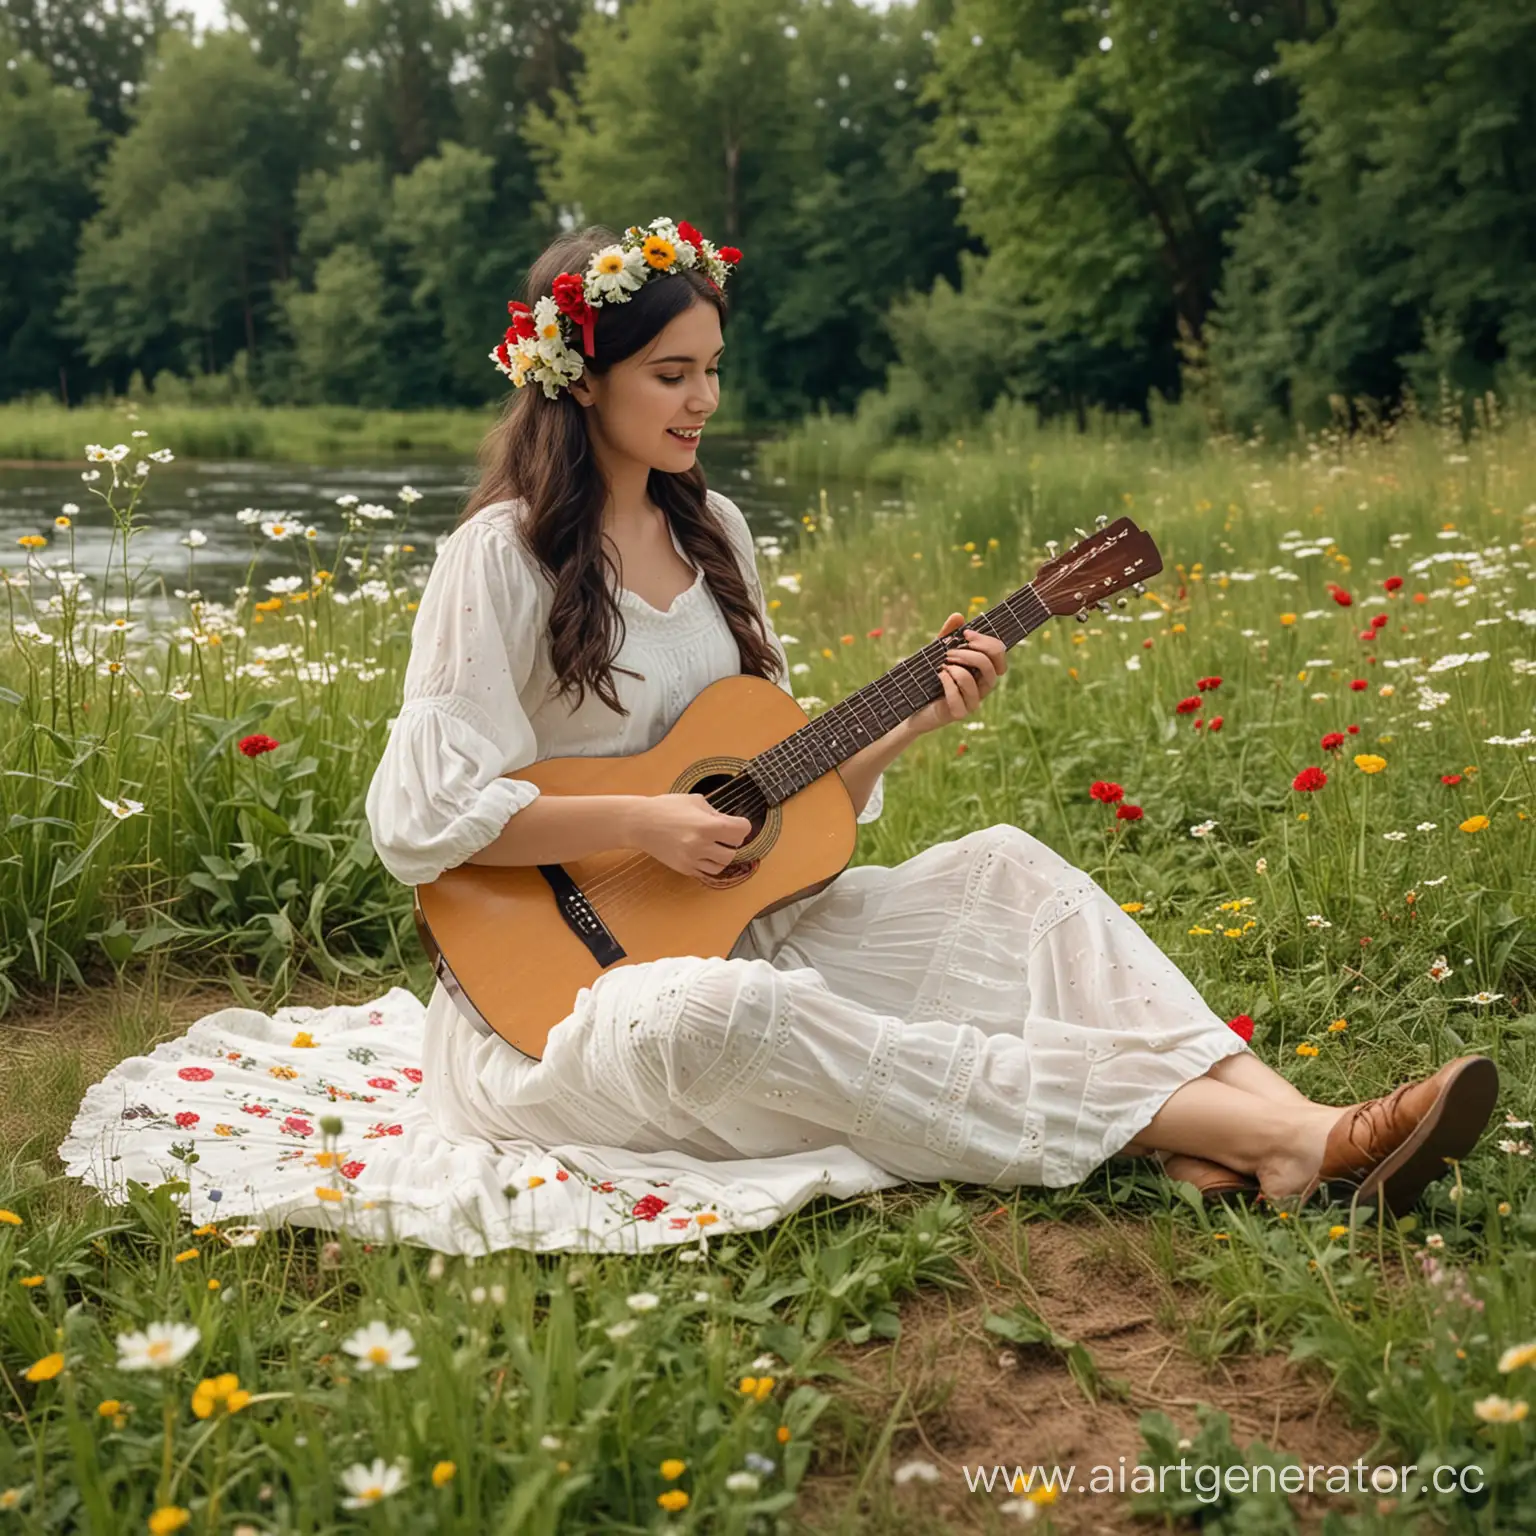 VintageDressed-Girl-Singing-Playing-Guitar-in-a-Flower-Meadow-by-a-River